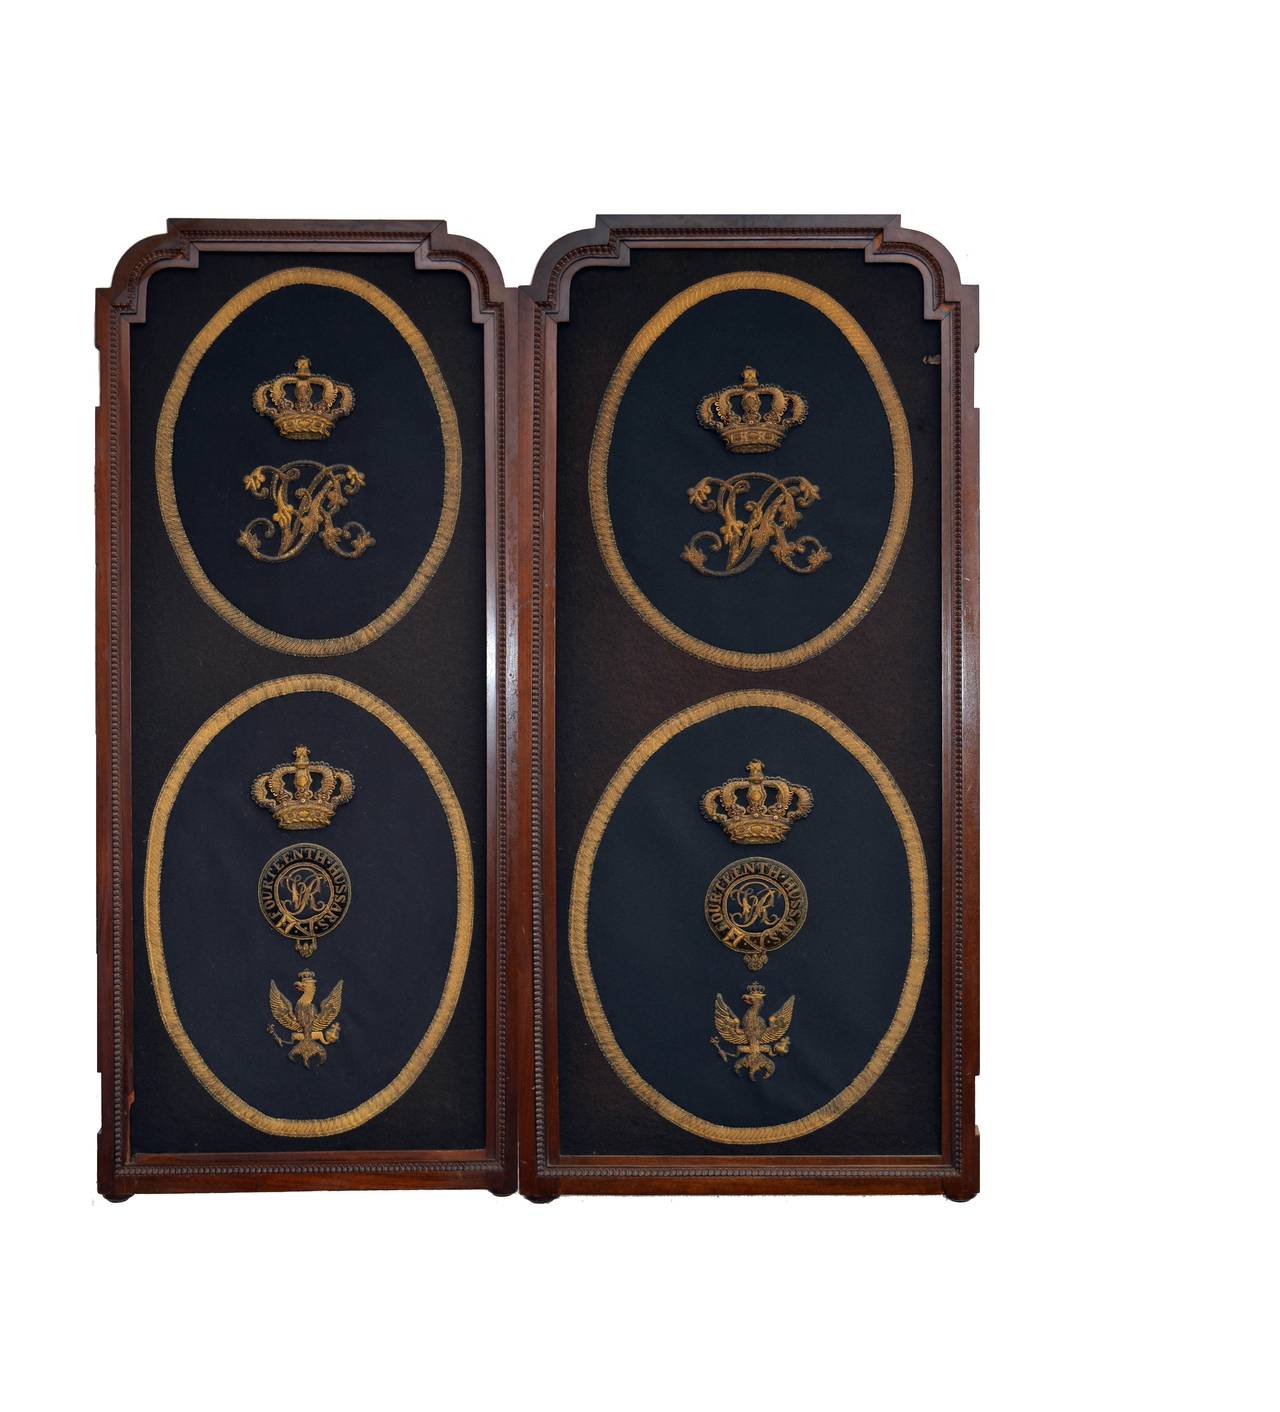 Gorgeous 19th century walnut swinging gentlemen's club doors with beautifully preserved Queen Victoria's, 14th (Kings) Hussars' Officers saddle blanket crests circa 1860's. Of the period mounted on felt mat with fancy gold brocade ovals. The queens